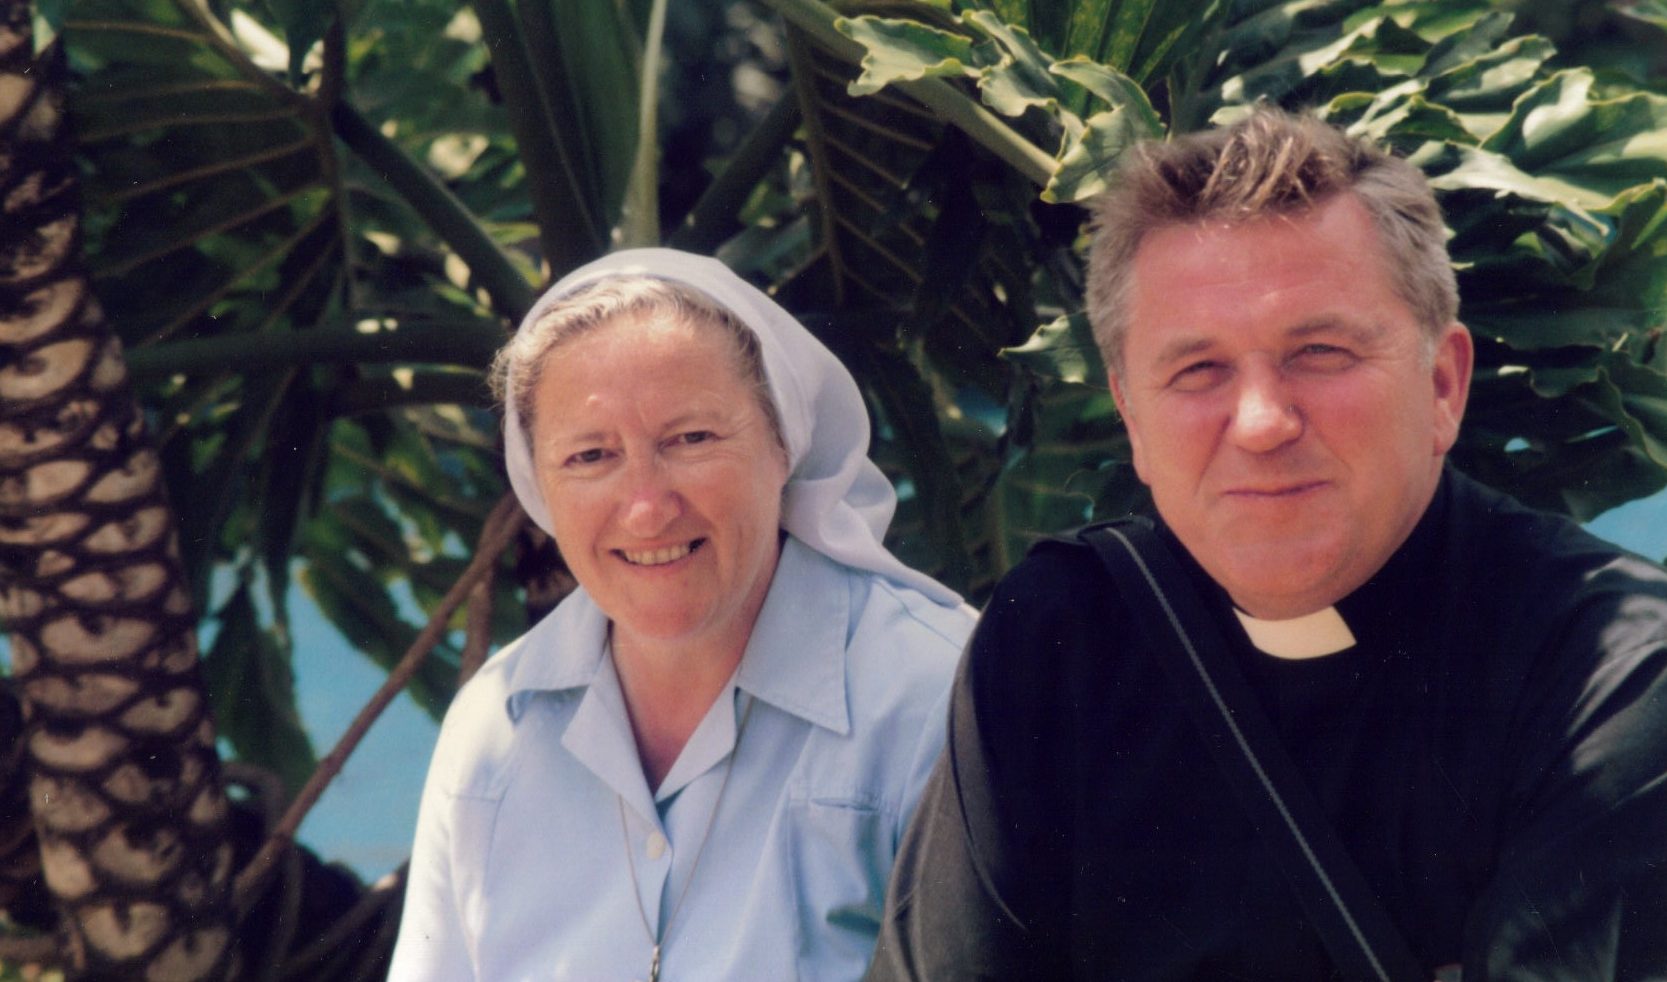 Sister Aloysius and Father Tom in Kenya 1982